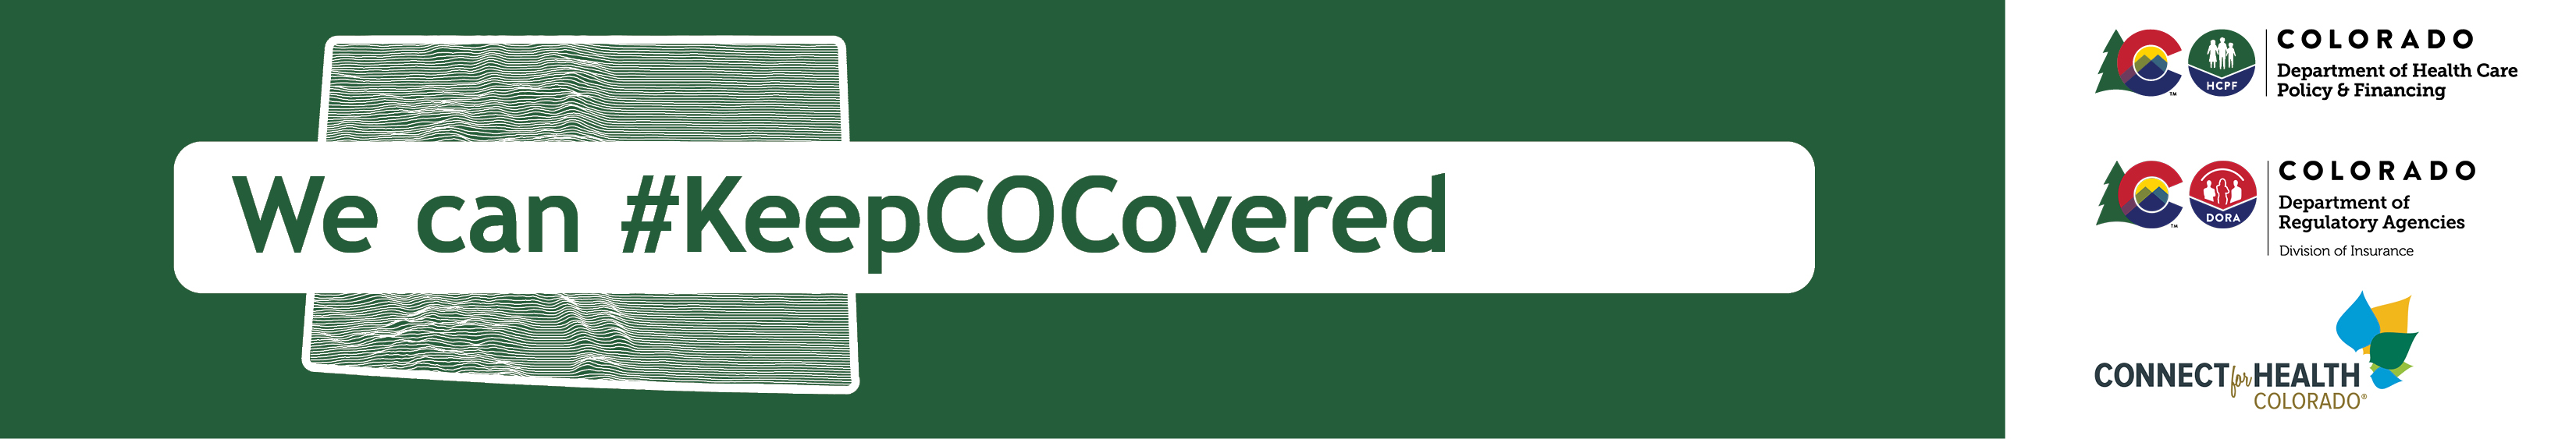 Keep Coloradans Covered - #KeepCOCovered